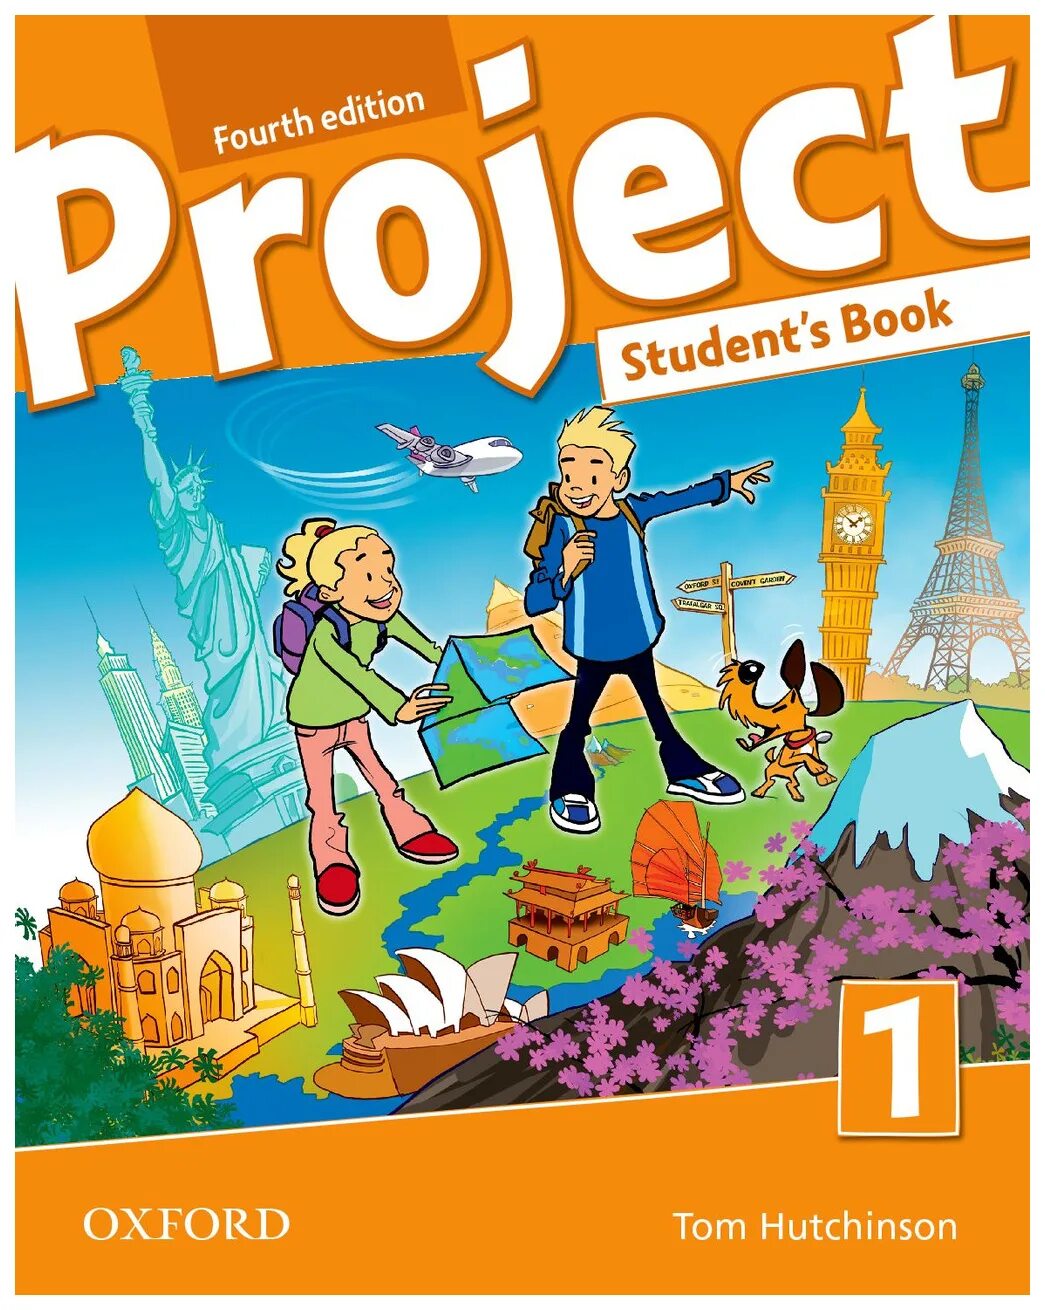 Project 1 fourth Edition students book. Project 1 4th Edition. Project student book4 fourth Edition Workbook book. Рабочая тетрадь Project 1 Oxford Tom Hutchinson. Project 1 book